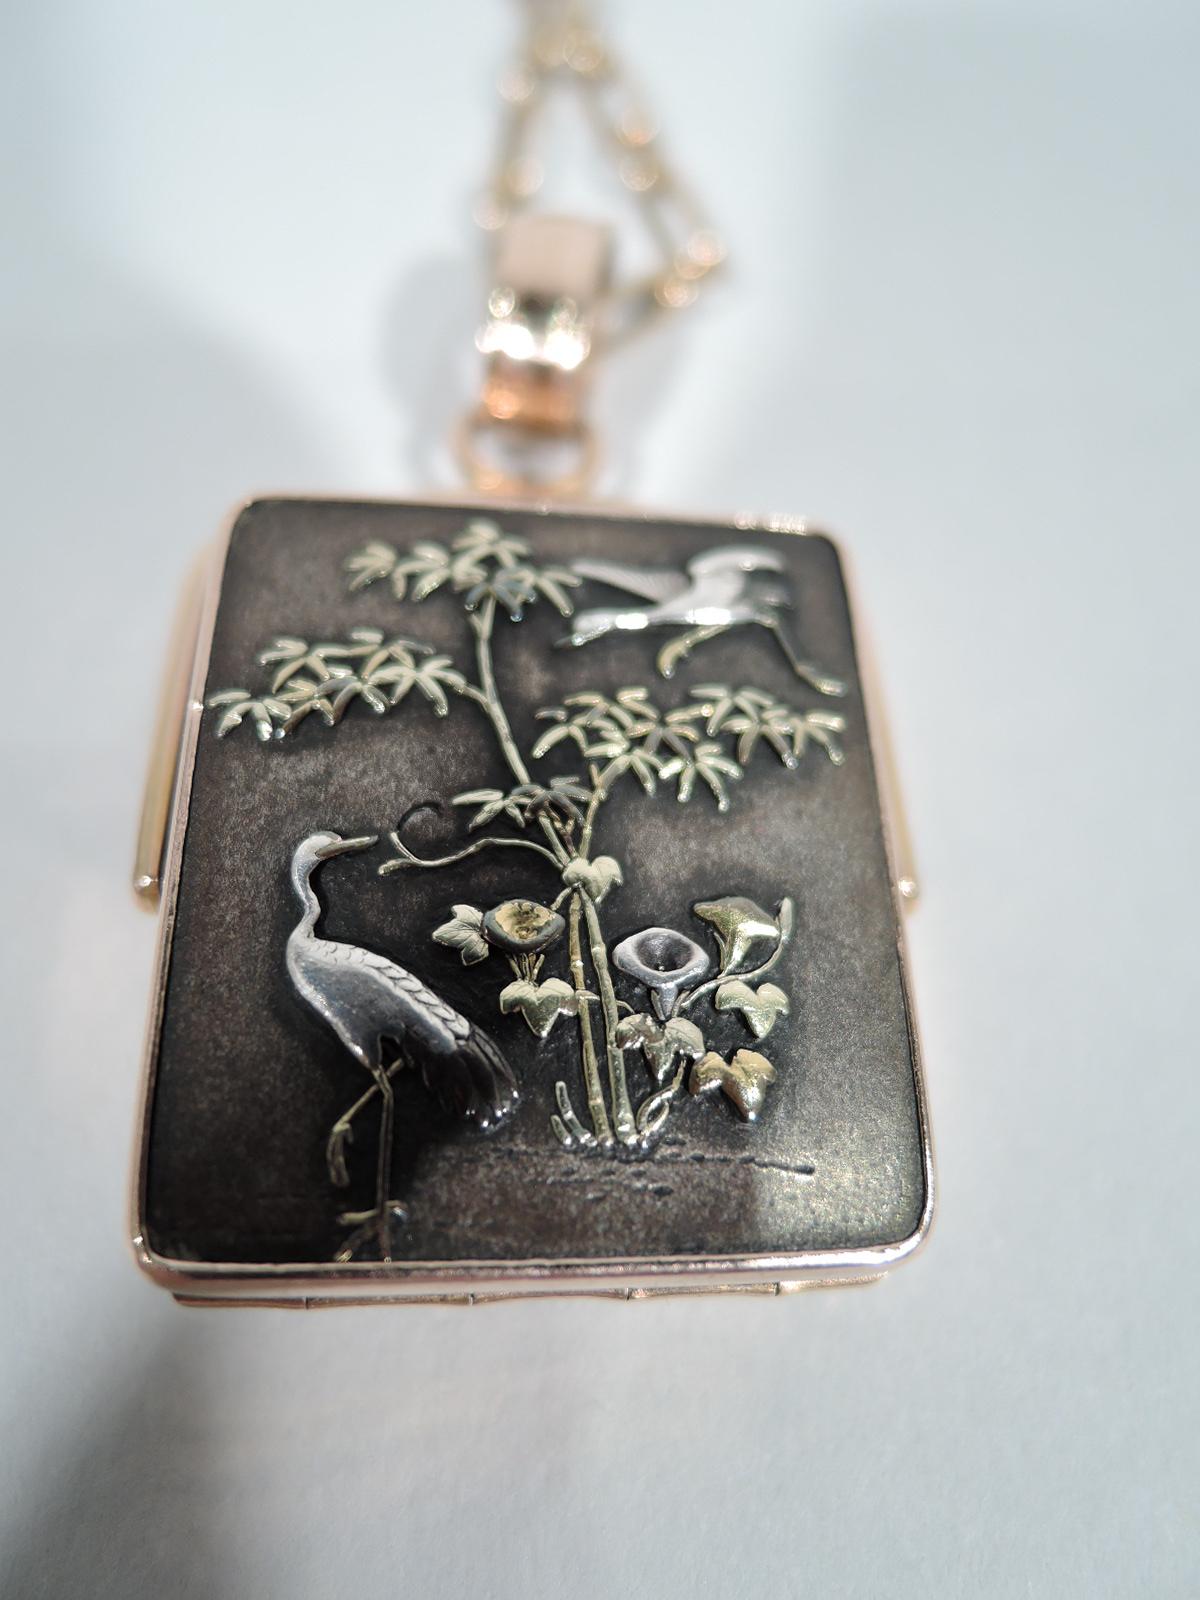 Beautiful Meiji-era shakudo locket with rose gold mount and chain. Locket is rectangular and hinged with gold and silver applied to shakudo ground. (Shakudo is a lacquer-shaded alloy.) Cranes and lilies are on one side. On other is fantasy scene